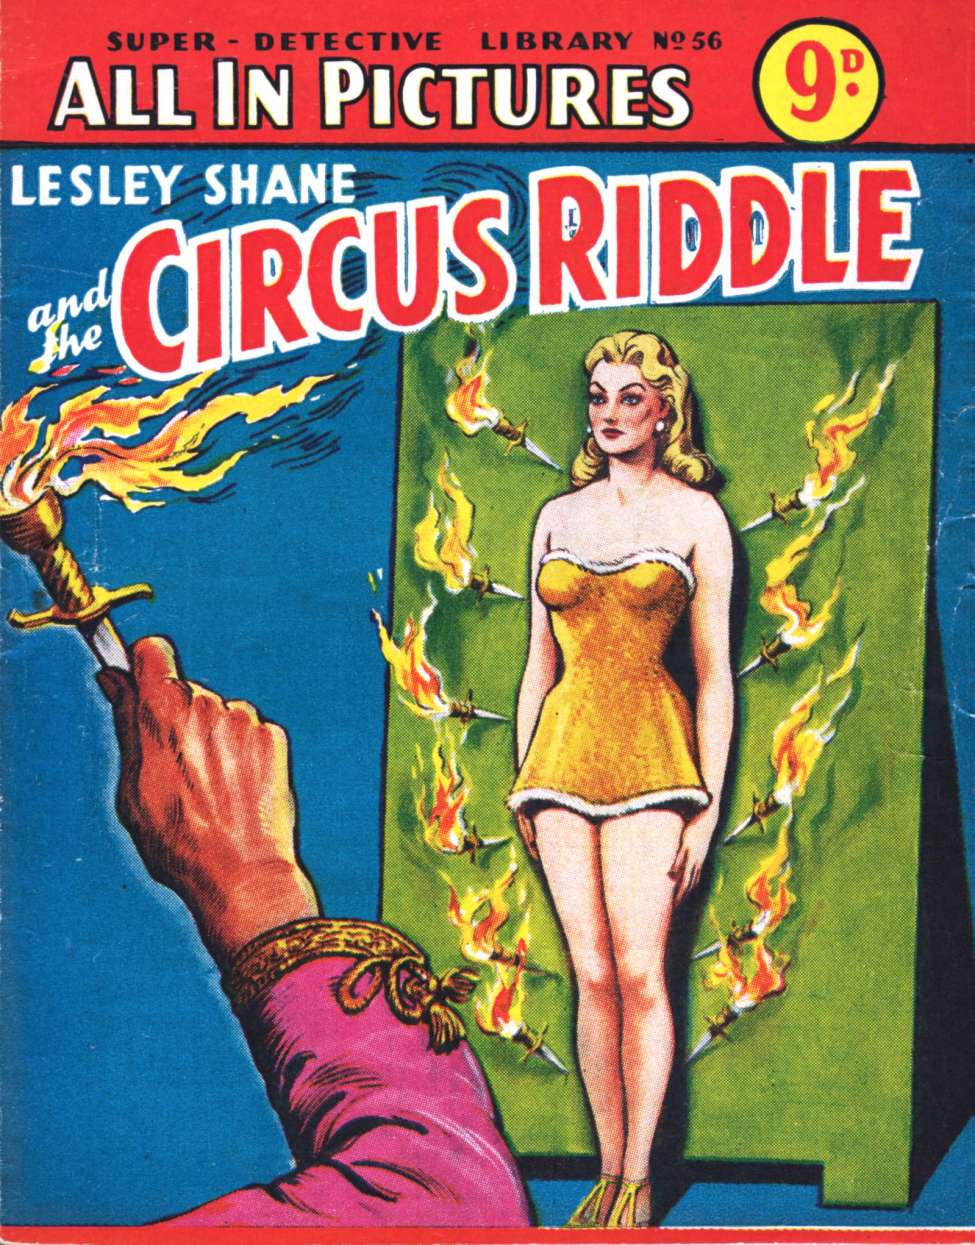 Book Cover For Super Detective Library 56 - The Circus Riddle